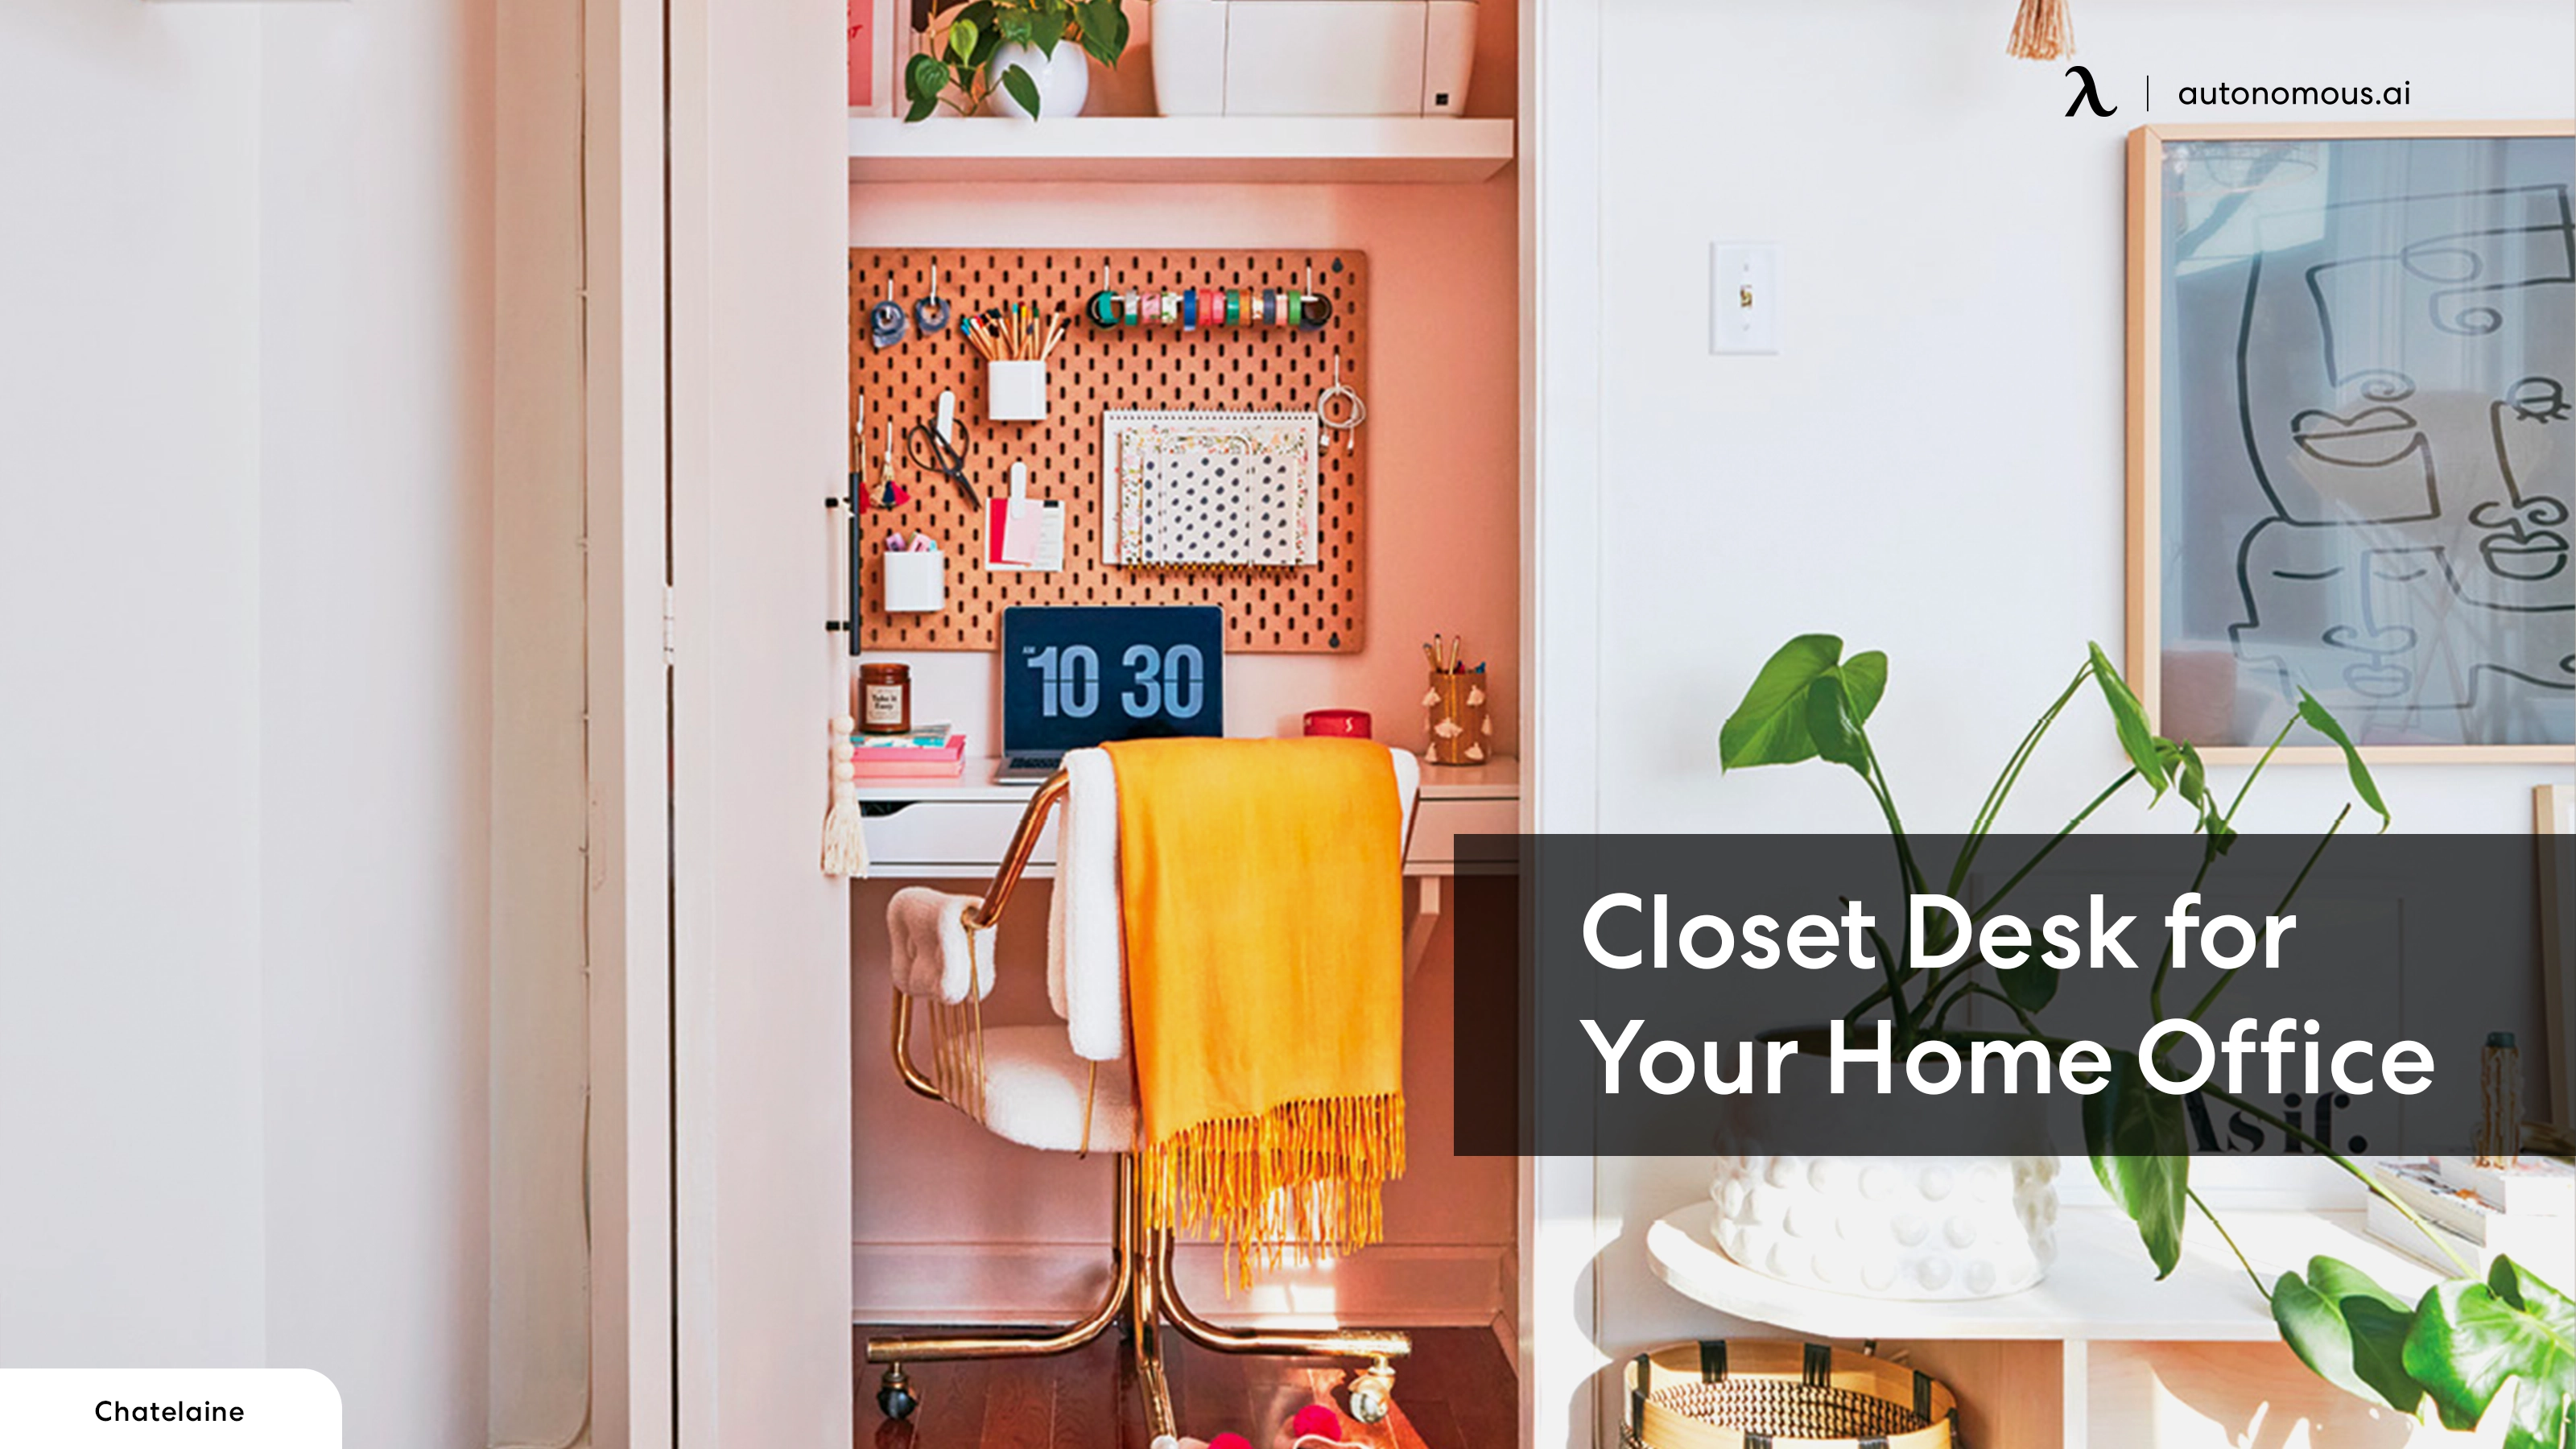 What Can Be Used as a Closet Desk for Your Home Office?